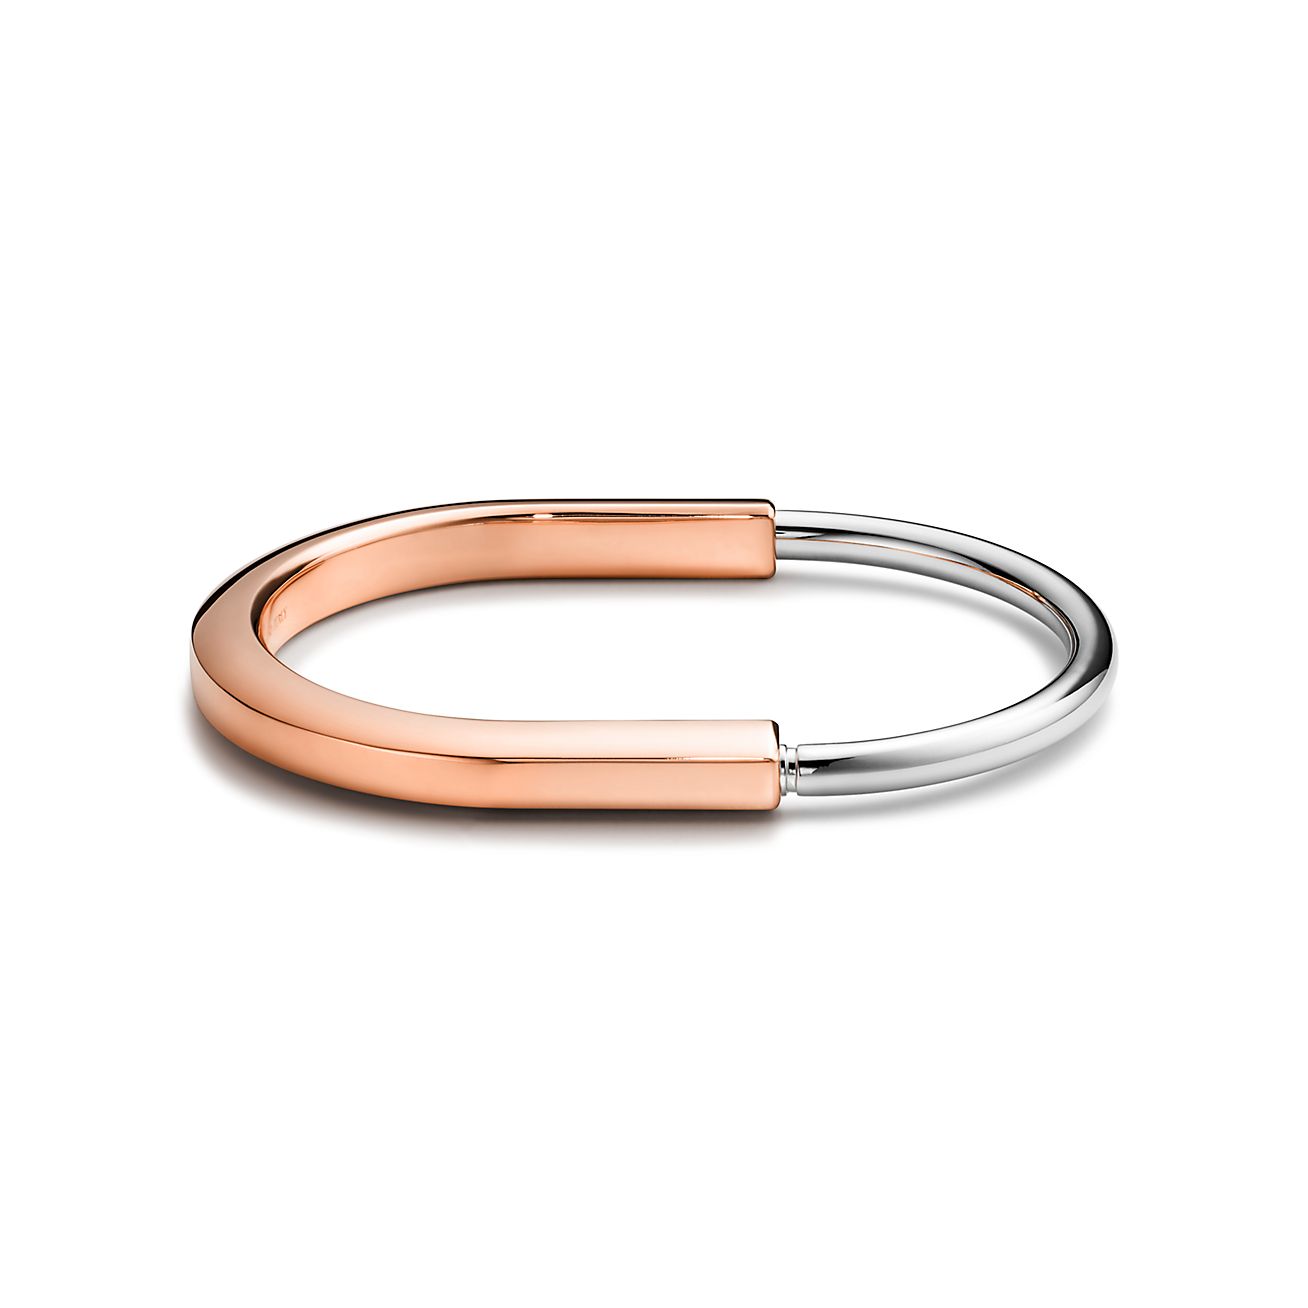 Tiffany Lock Bangle in Rose and White Gold